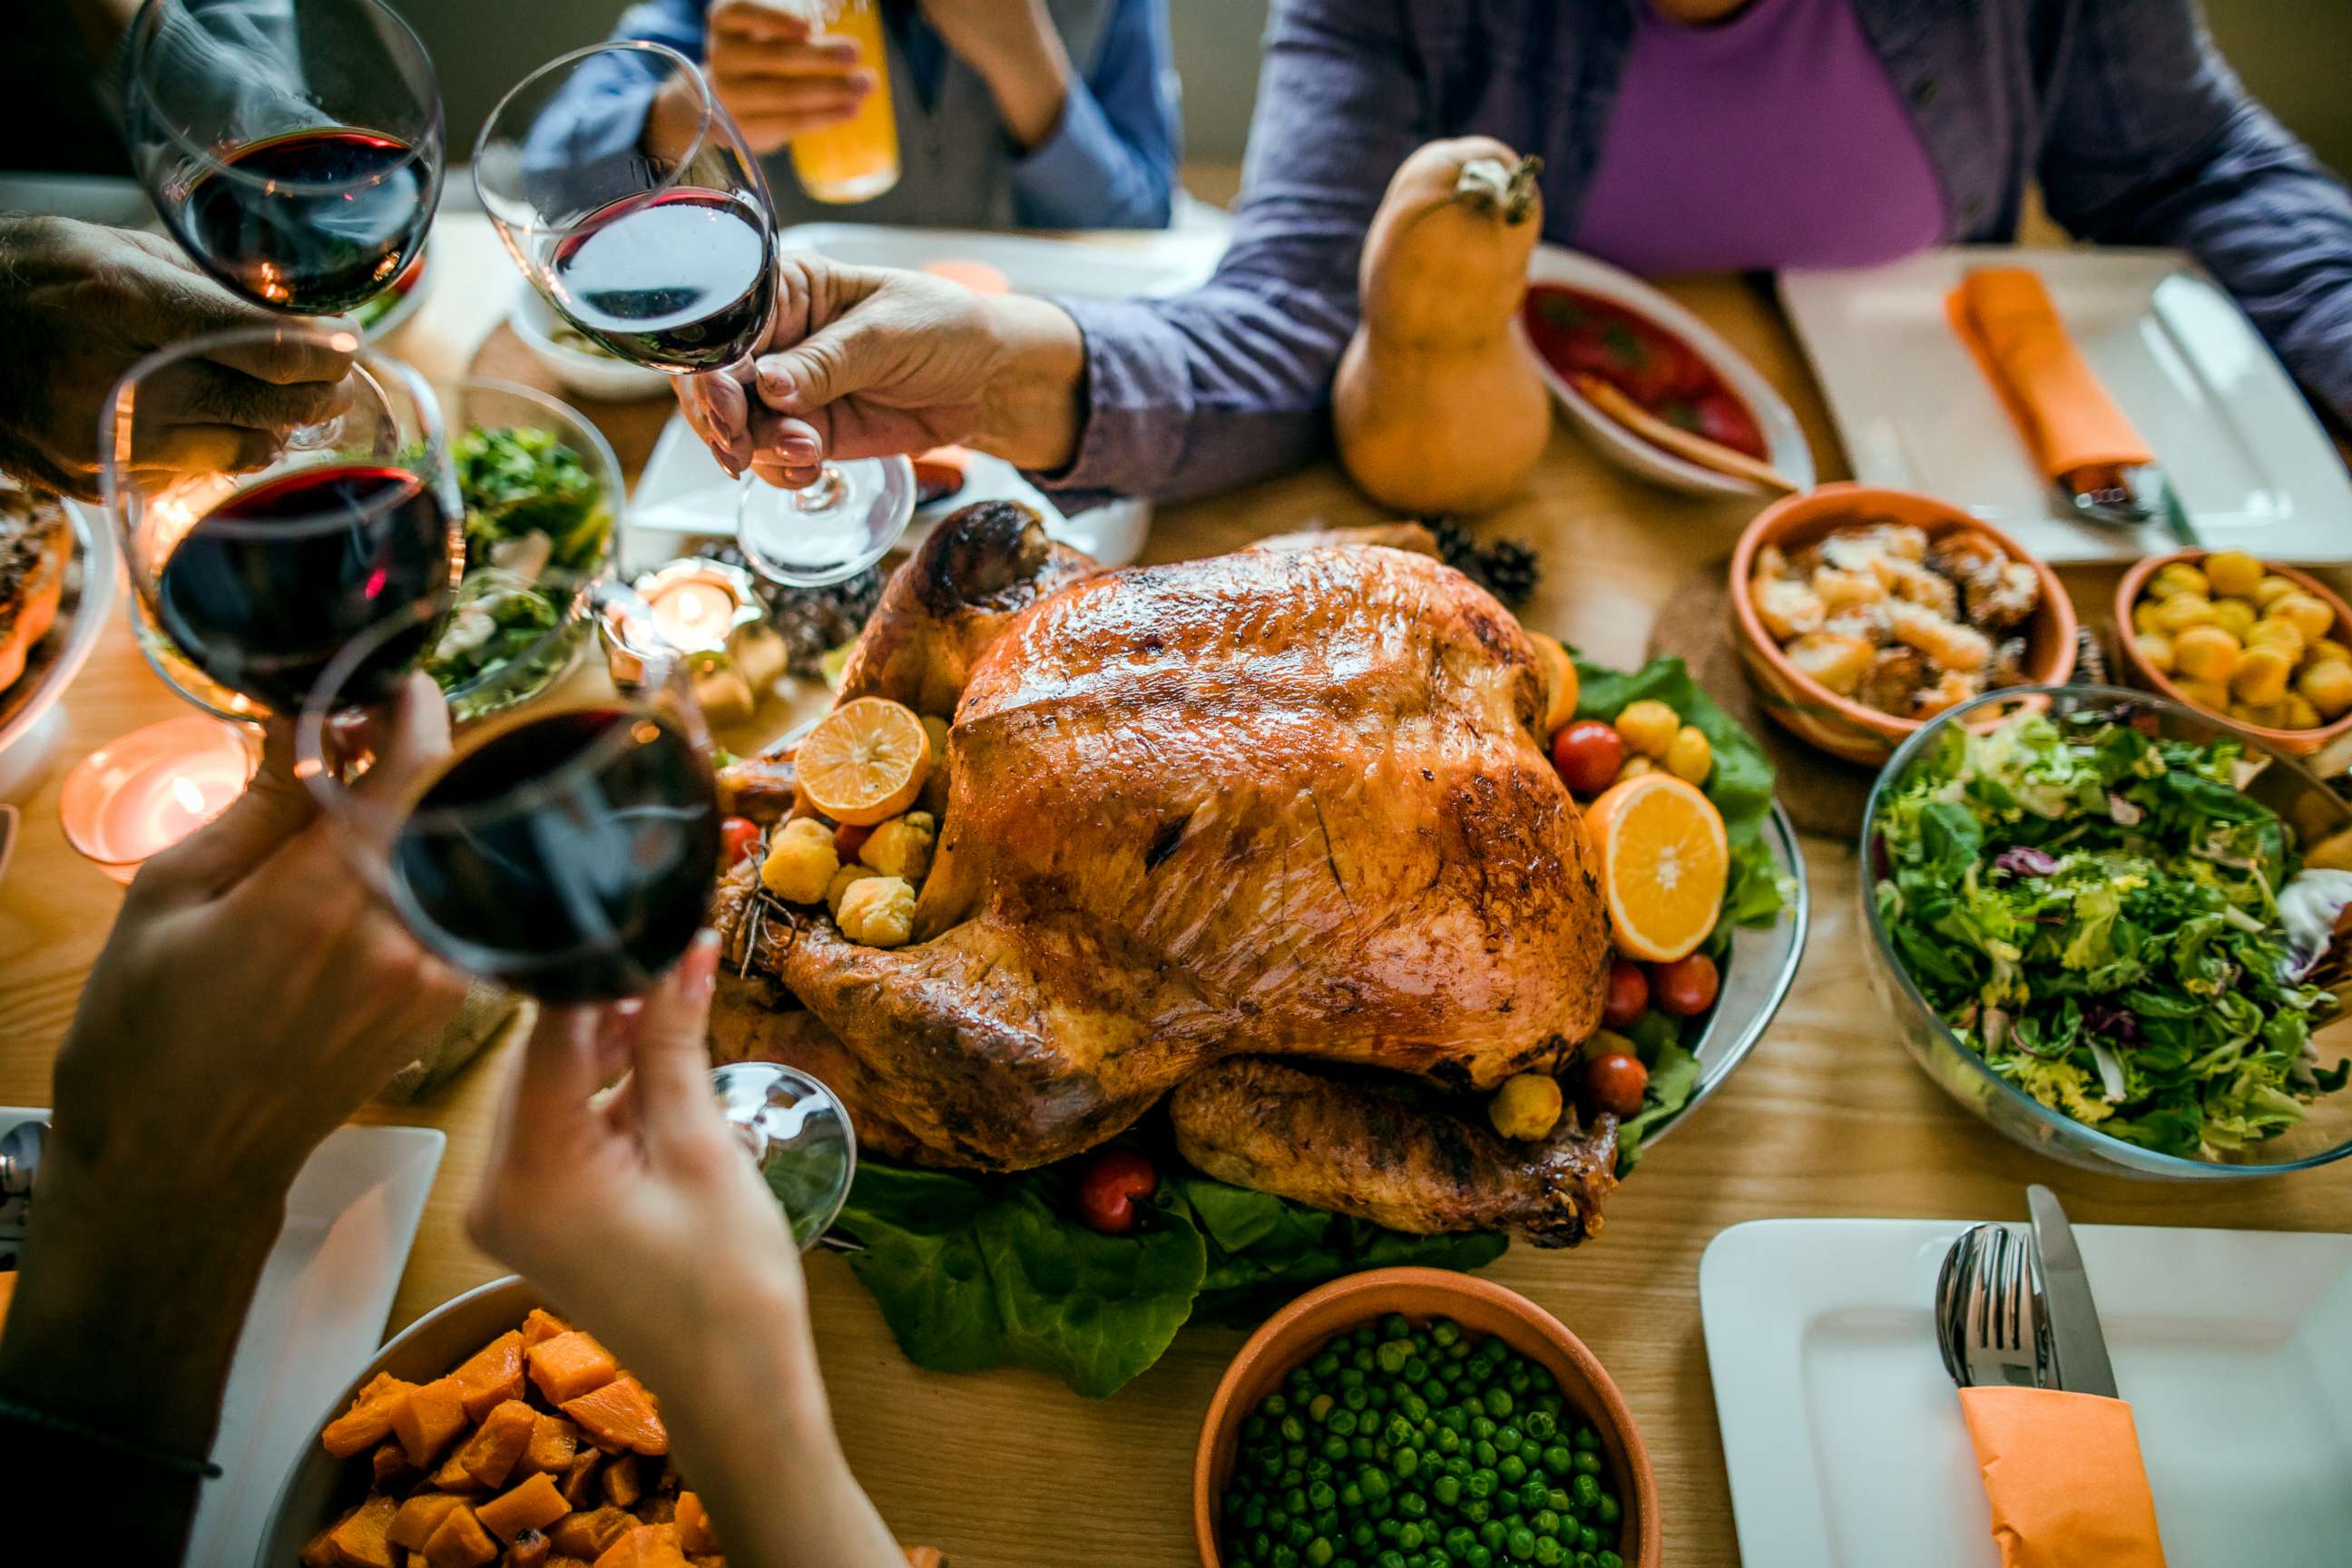 PHOTO: This stock photo depicts a family toasting with a glass of wine before enjoying a Thanksgiving meal.